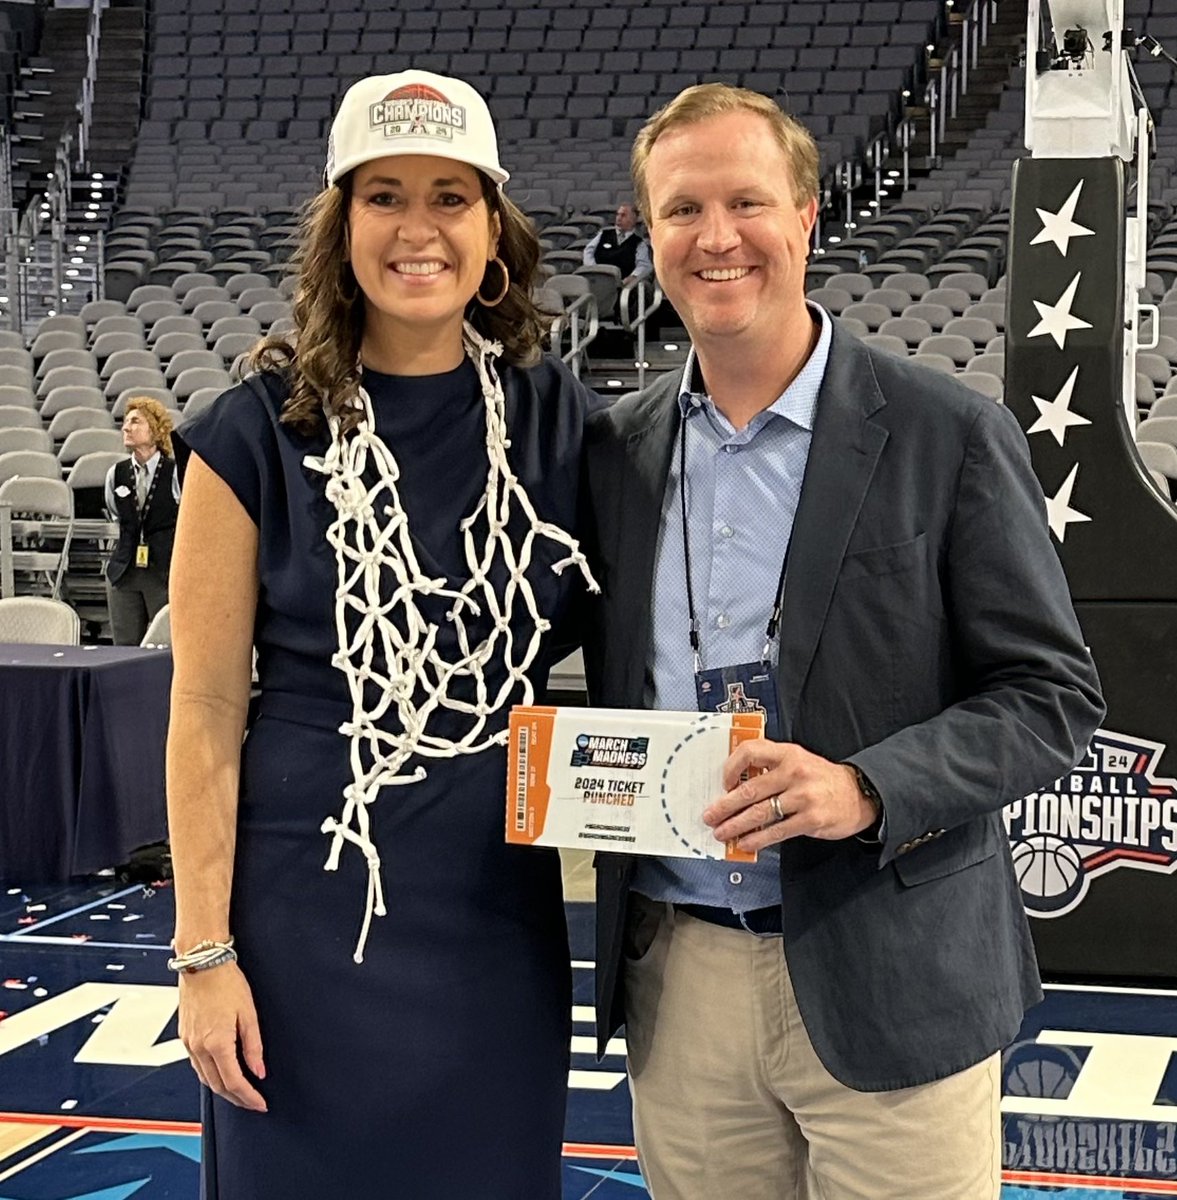 Congratulations to @LindsaySEdmonds and @RiceWBB on winning the @American_Conf tournament championship and punching a ticket to the NCAA tournament! #MarchMadness #RFND #GoOwls👐